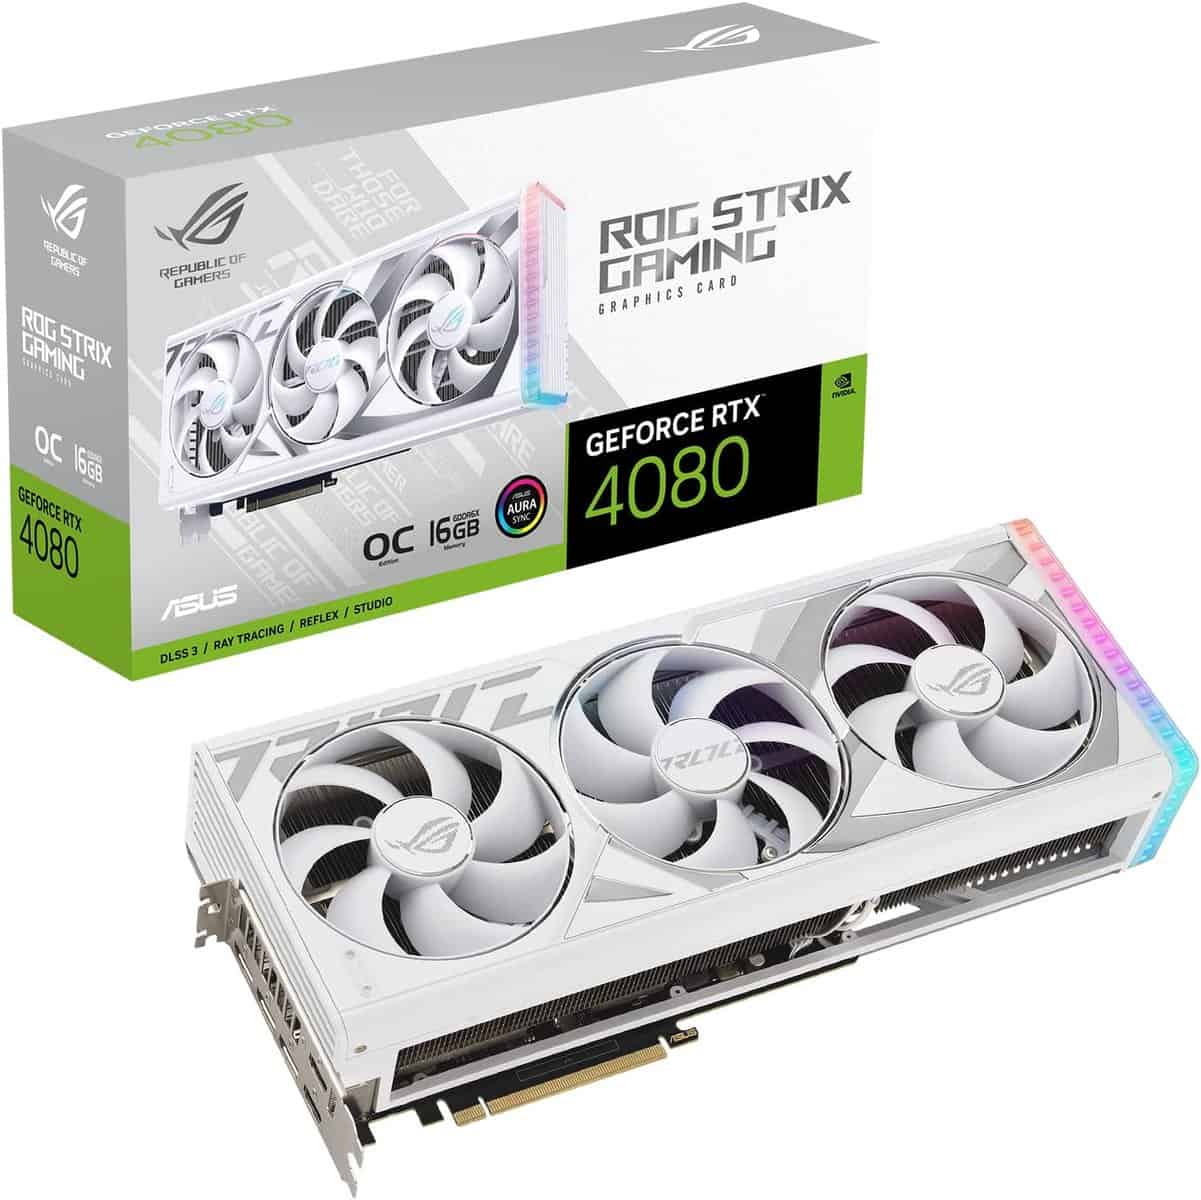 NVIDIA GeForce RTX 4090 & RTX 4080 Graphics Cards Prices Drop Below MSRP,  Starting At $1549 & $1149 US